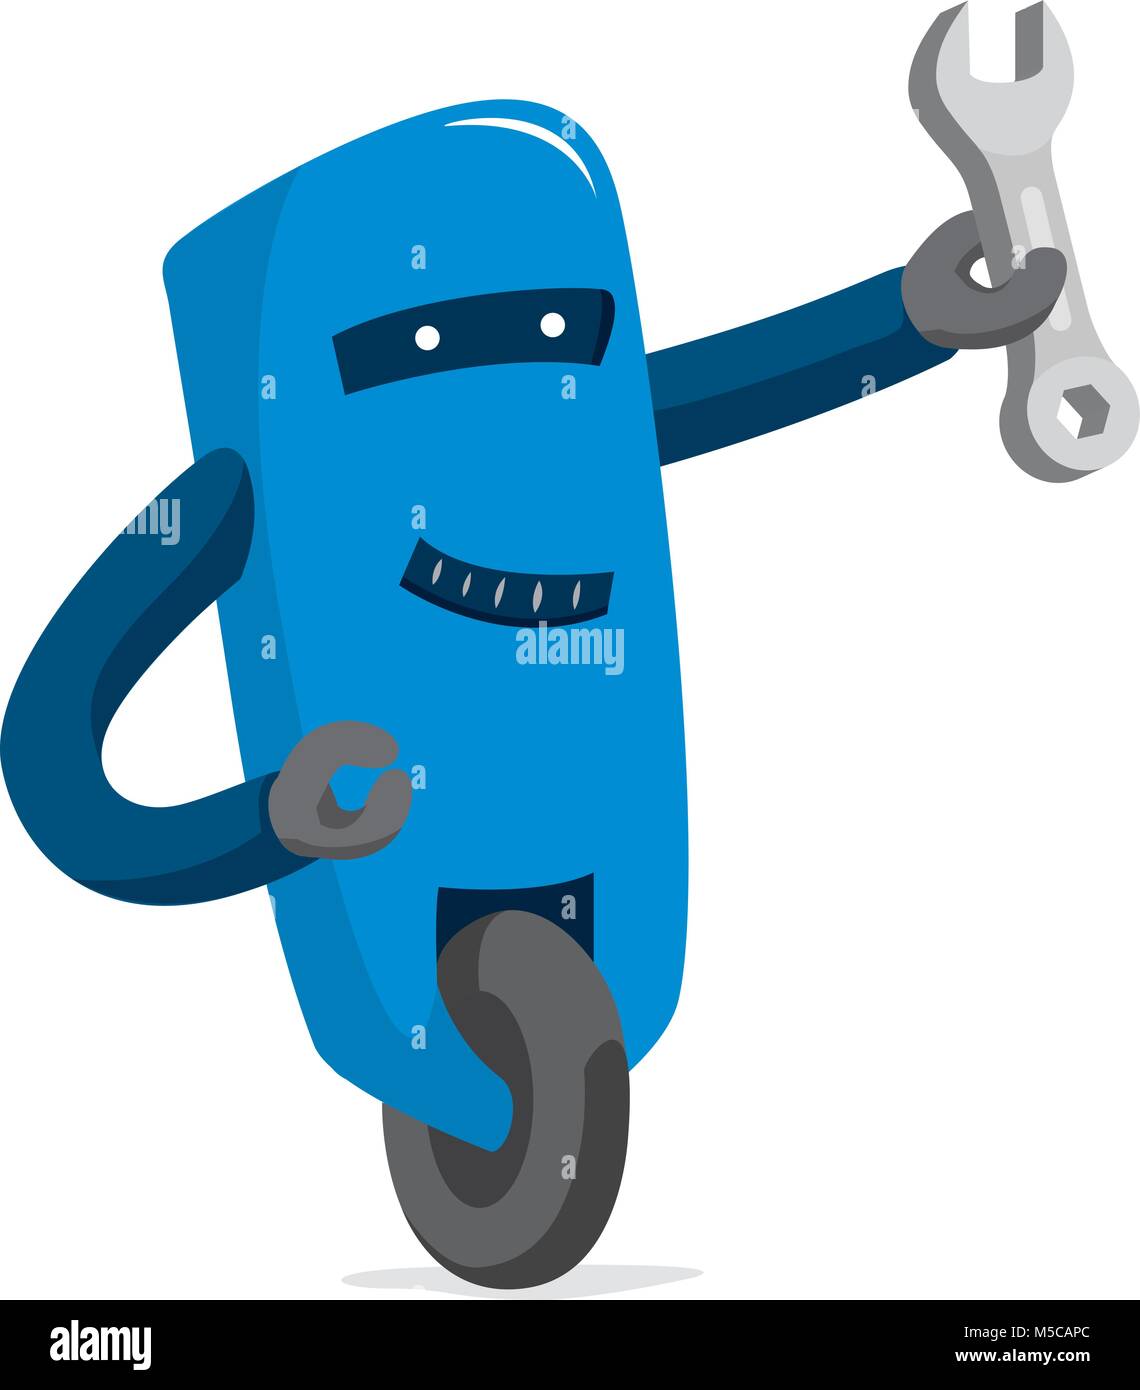 Cartoon illustration of support robot holding a wrench Stock Vector